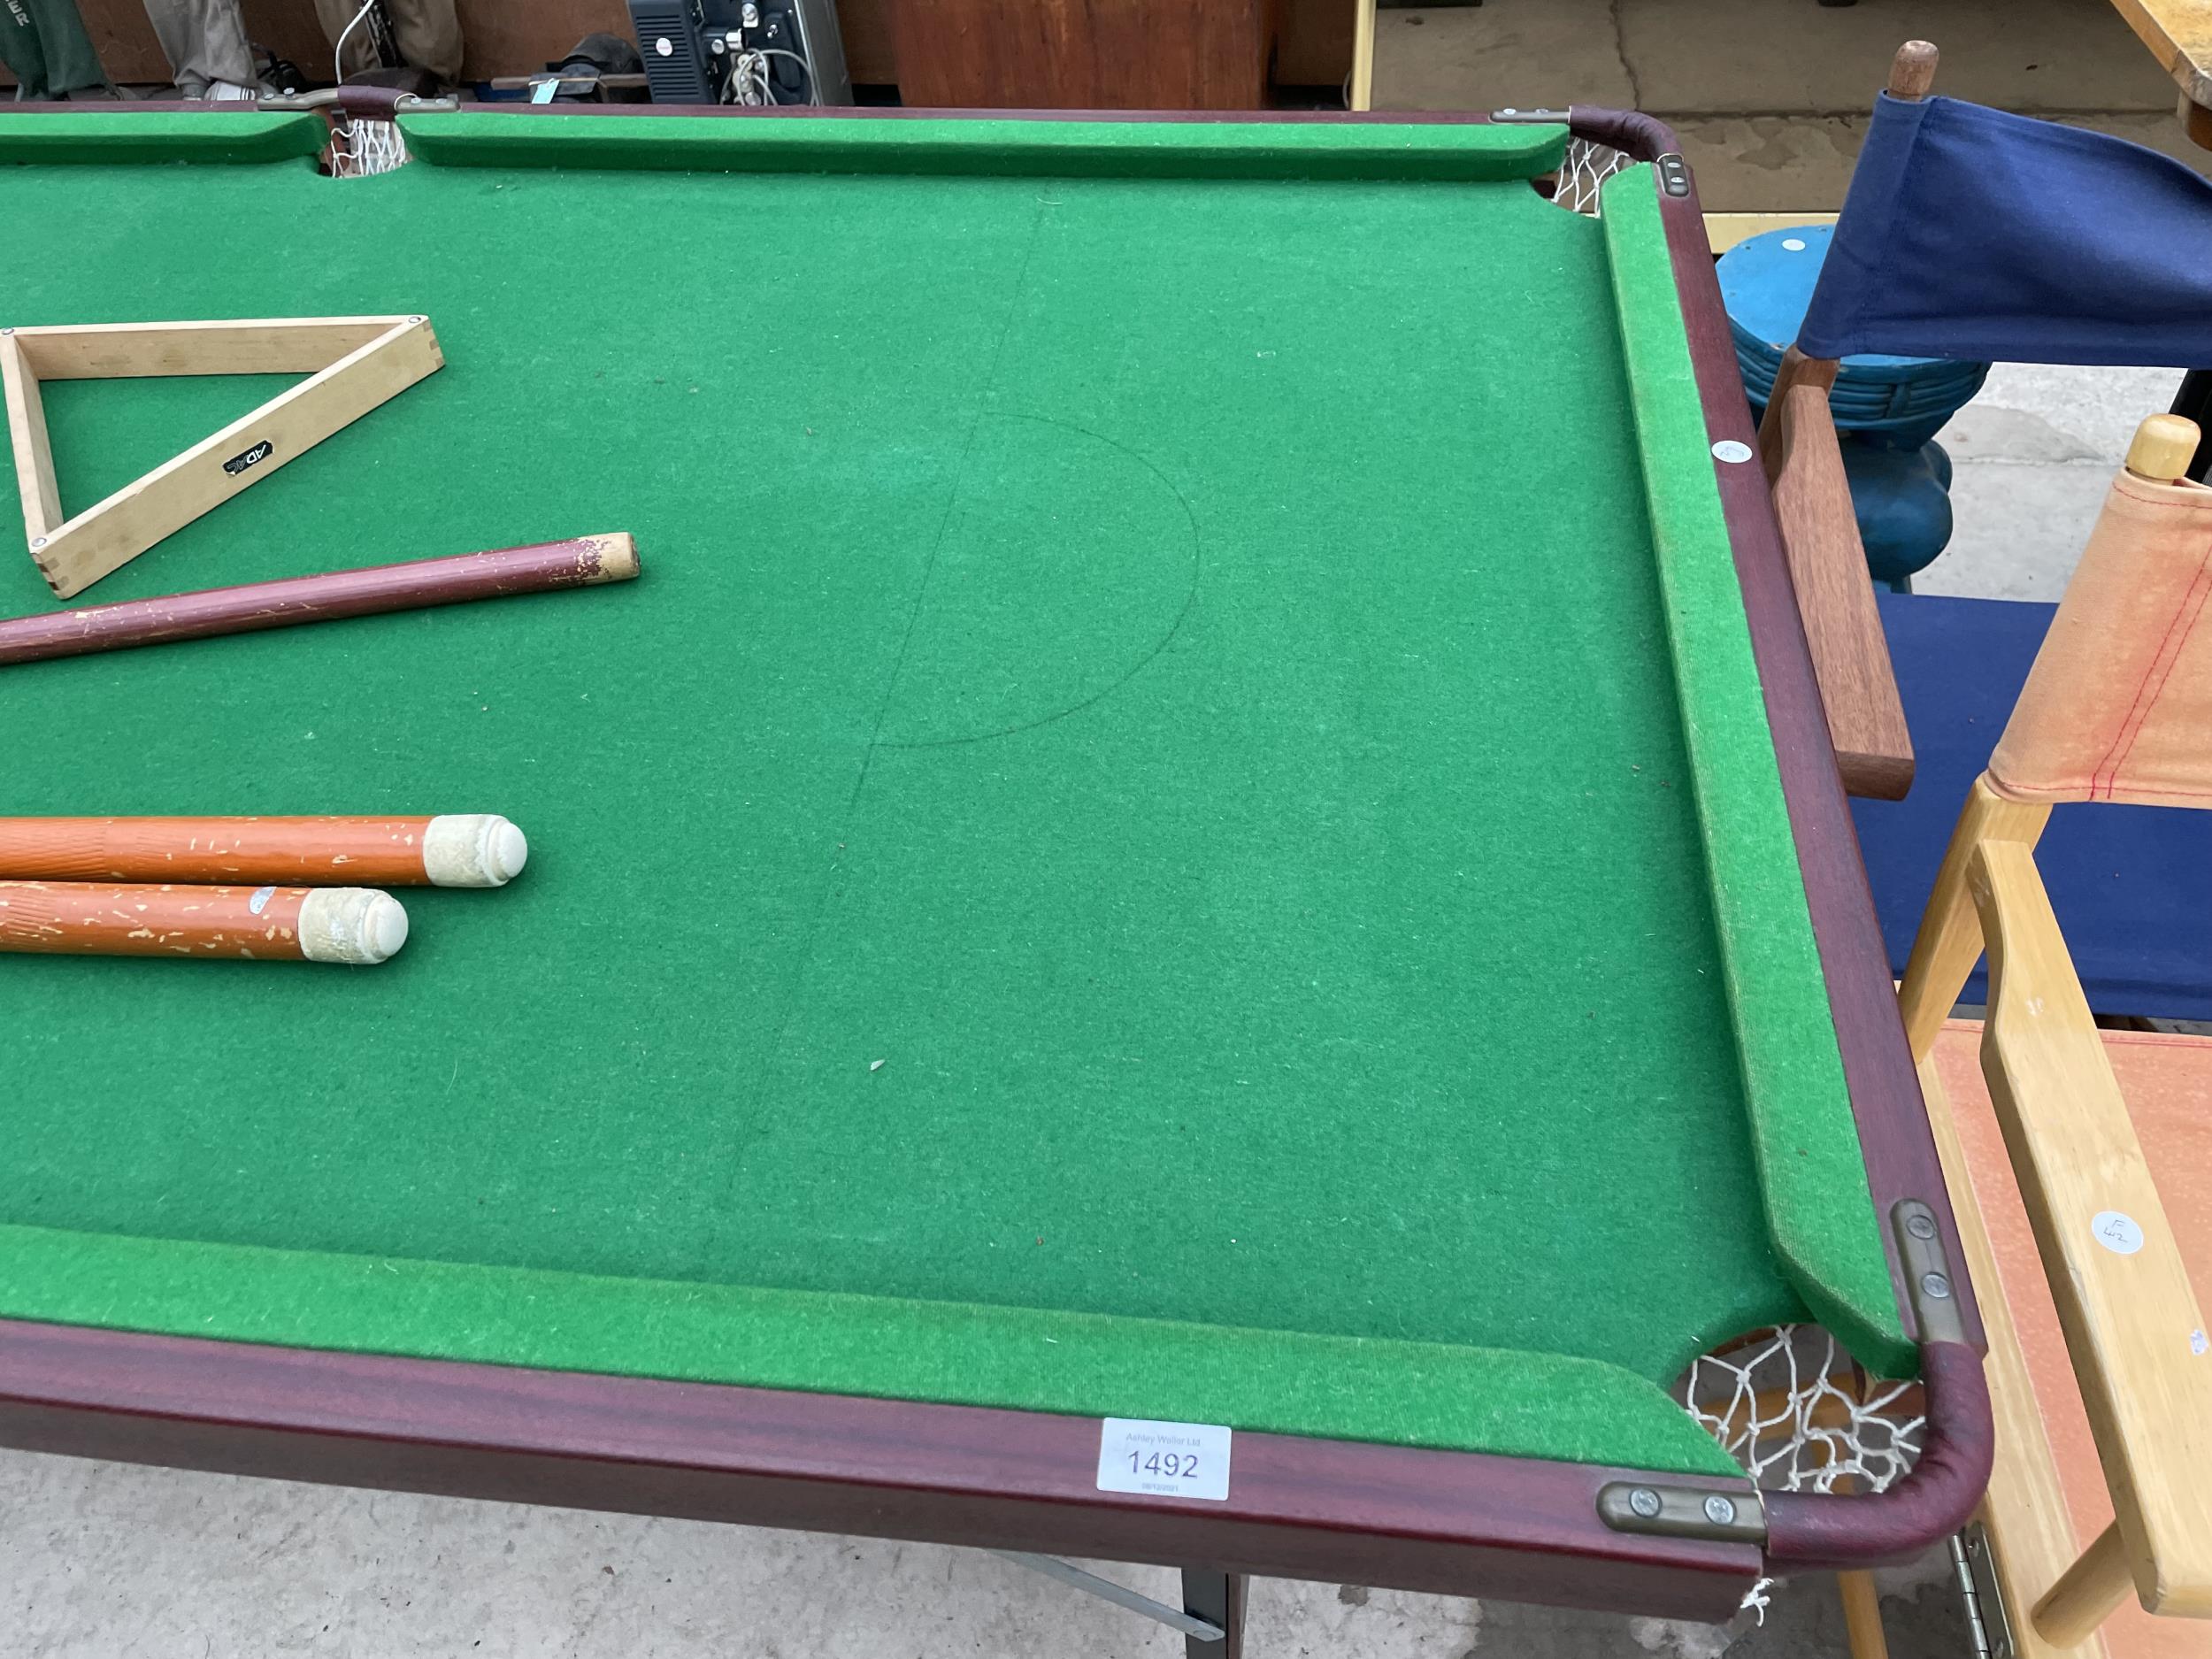 A FOLDING SNOOKER TABLE WITH THREE CUES, A TRINAGLE, SCORE BOARD AND A SET OF BALLS - Bild 2 aus 4